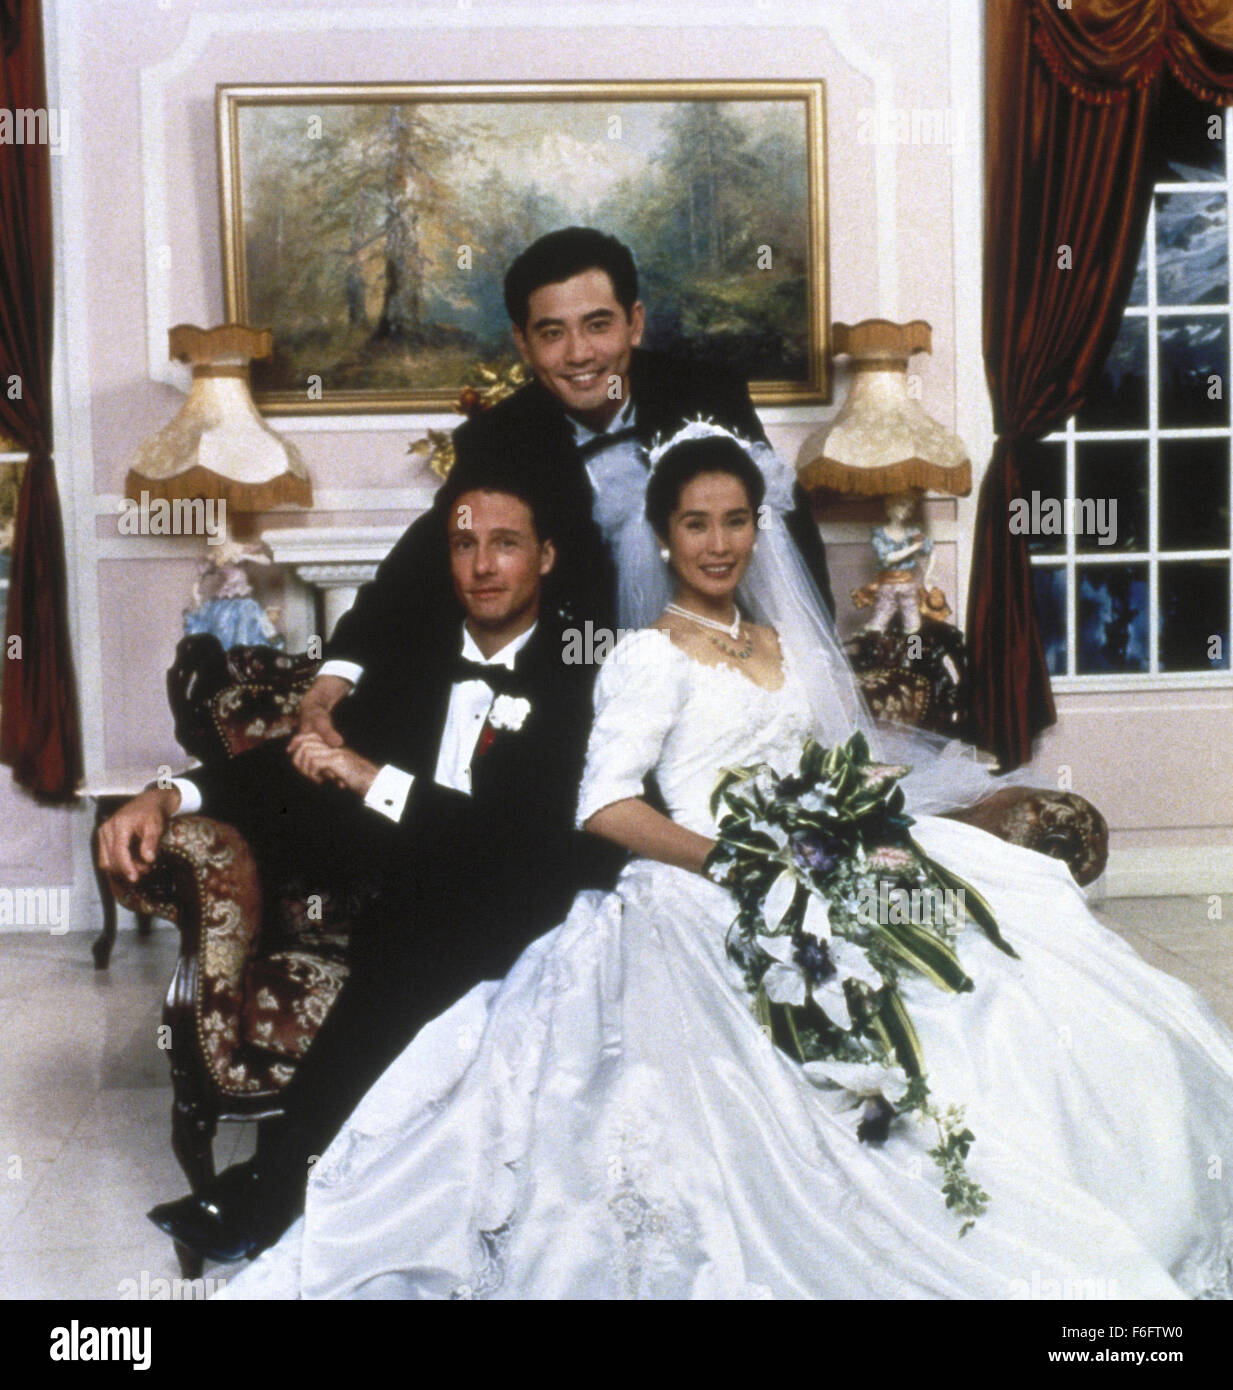 RELEASE DATE: Aug 04, 1993. MOVIE TITLE: The Wedding Banquet aka Hsi yen. STUDIO: The Samuel Goldwyn Company. PLOT: A gay Taiwanese-American man is in a happy long term relationship in Manhattan, but his parents in Taiwan are always pressuring him to marry. His tenant, a young Chinese girl needs to marry an American citizen to obtain her green card, so a deal is made. Complications arise when the joyous parents arrive for the wedding and a huge cross-cultural banquet is arranged to celebrate. PICTURED: MITCHELL LICHTENSTEIN as Simon, WINSTON CHAO as Wai-Tung Gao, MAY CHIN as Wei-Wei. Stock Photo